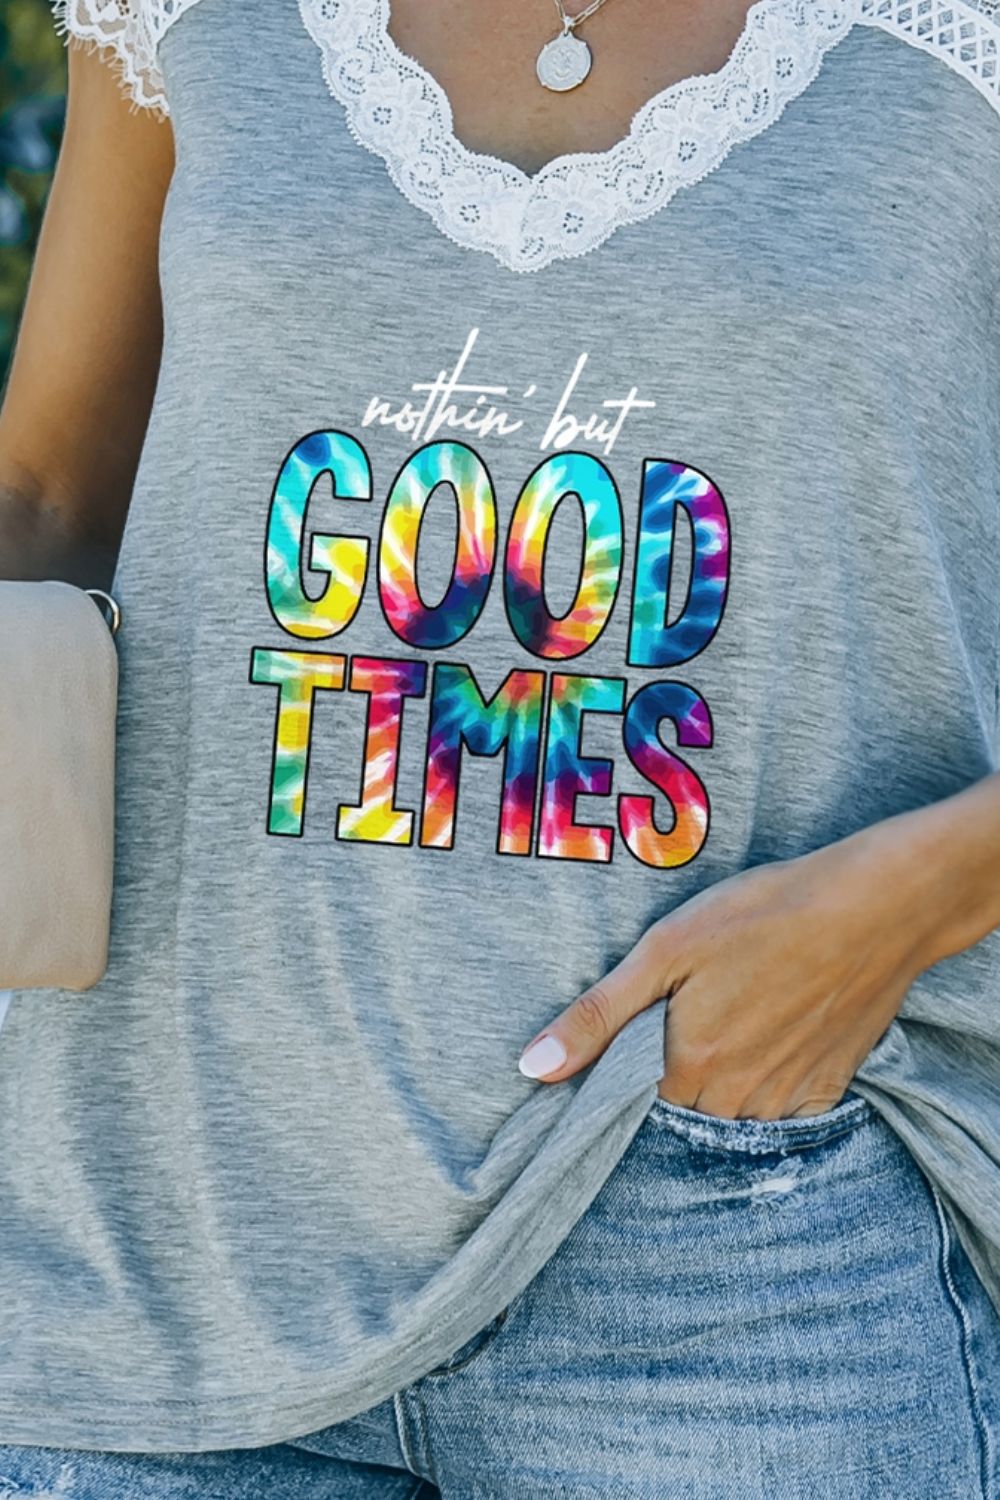 Lace Trim V-Neck NOTHIN BUT GOOD TIMES Graphic Tee